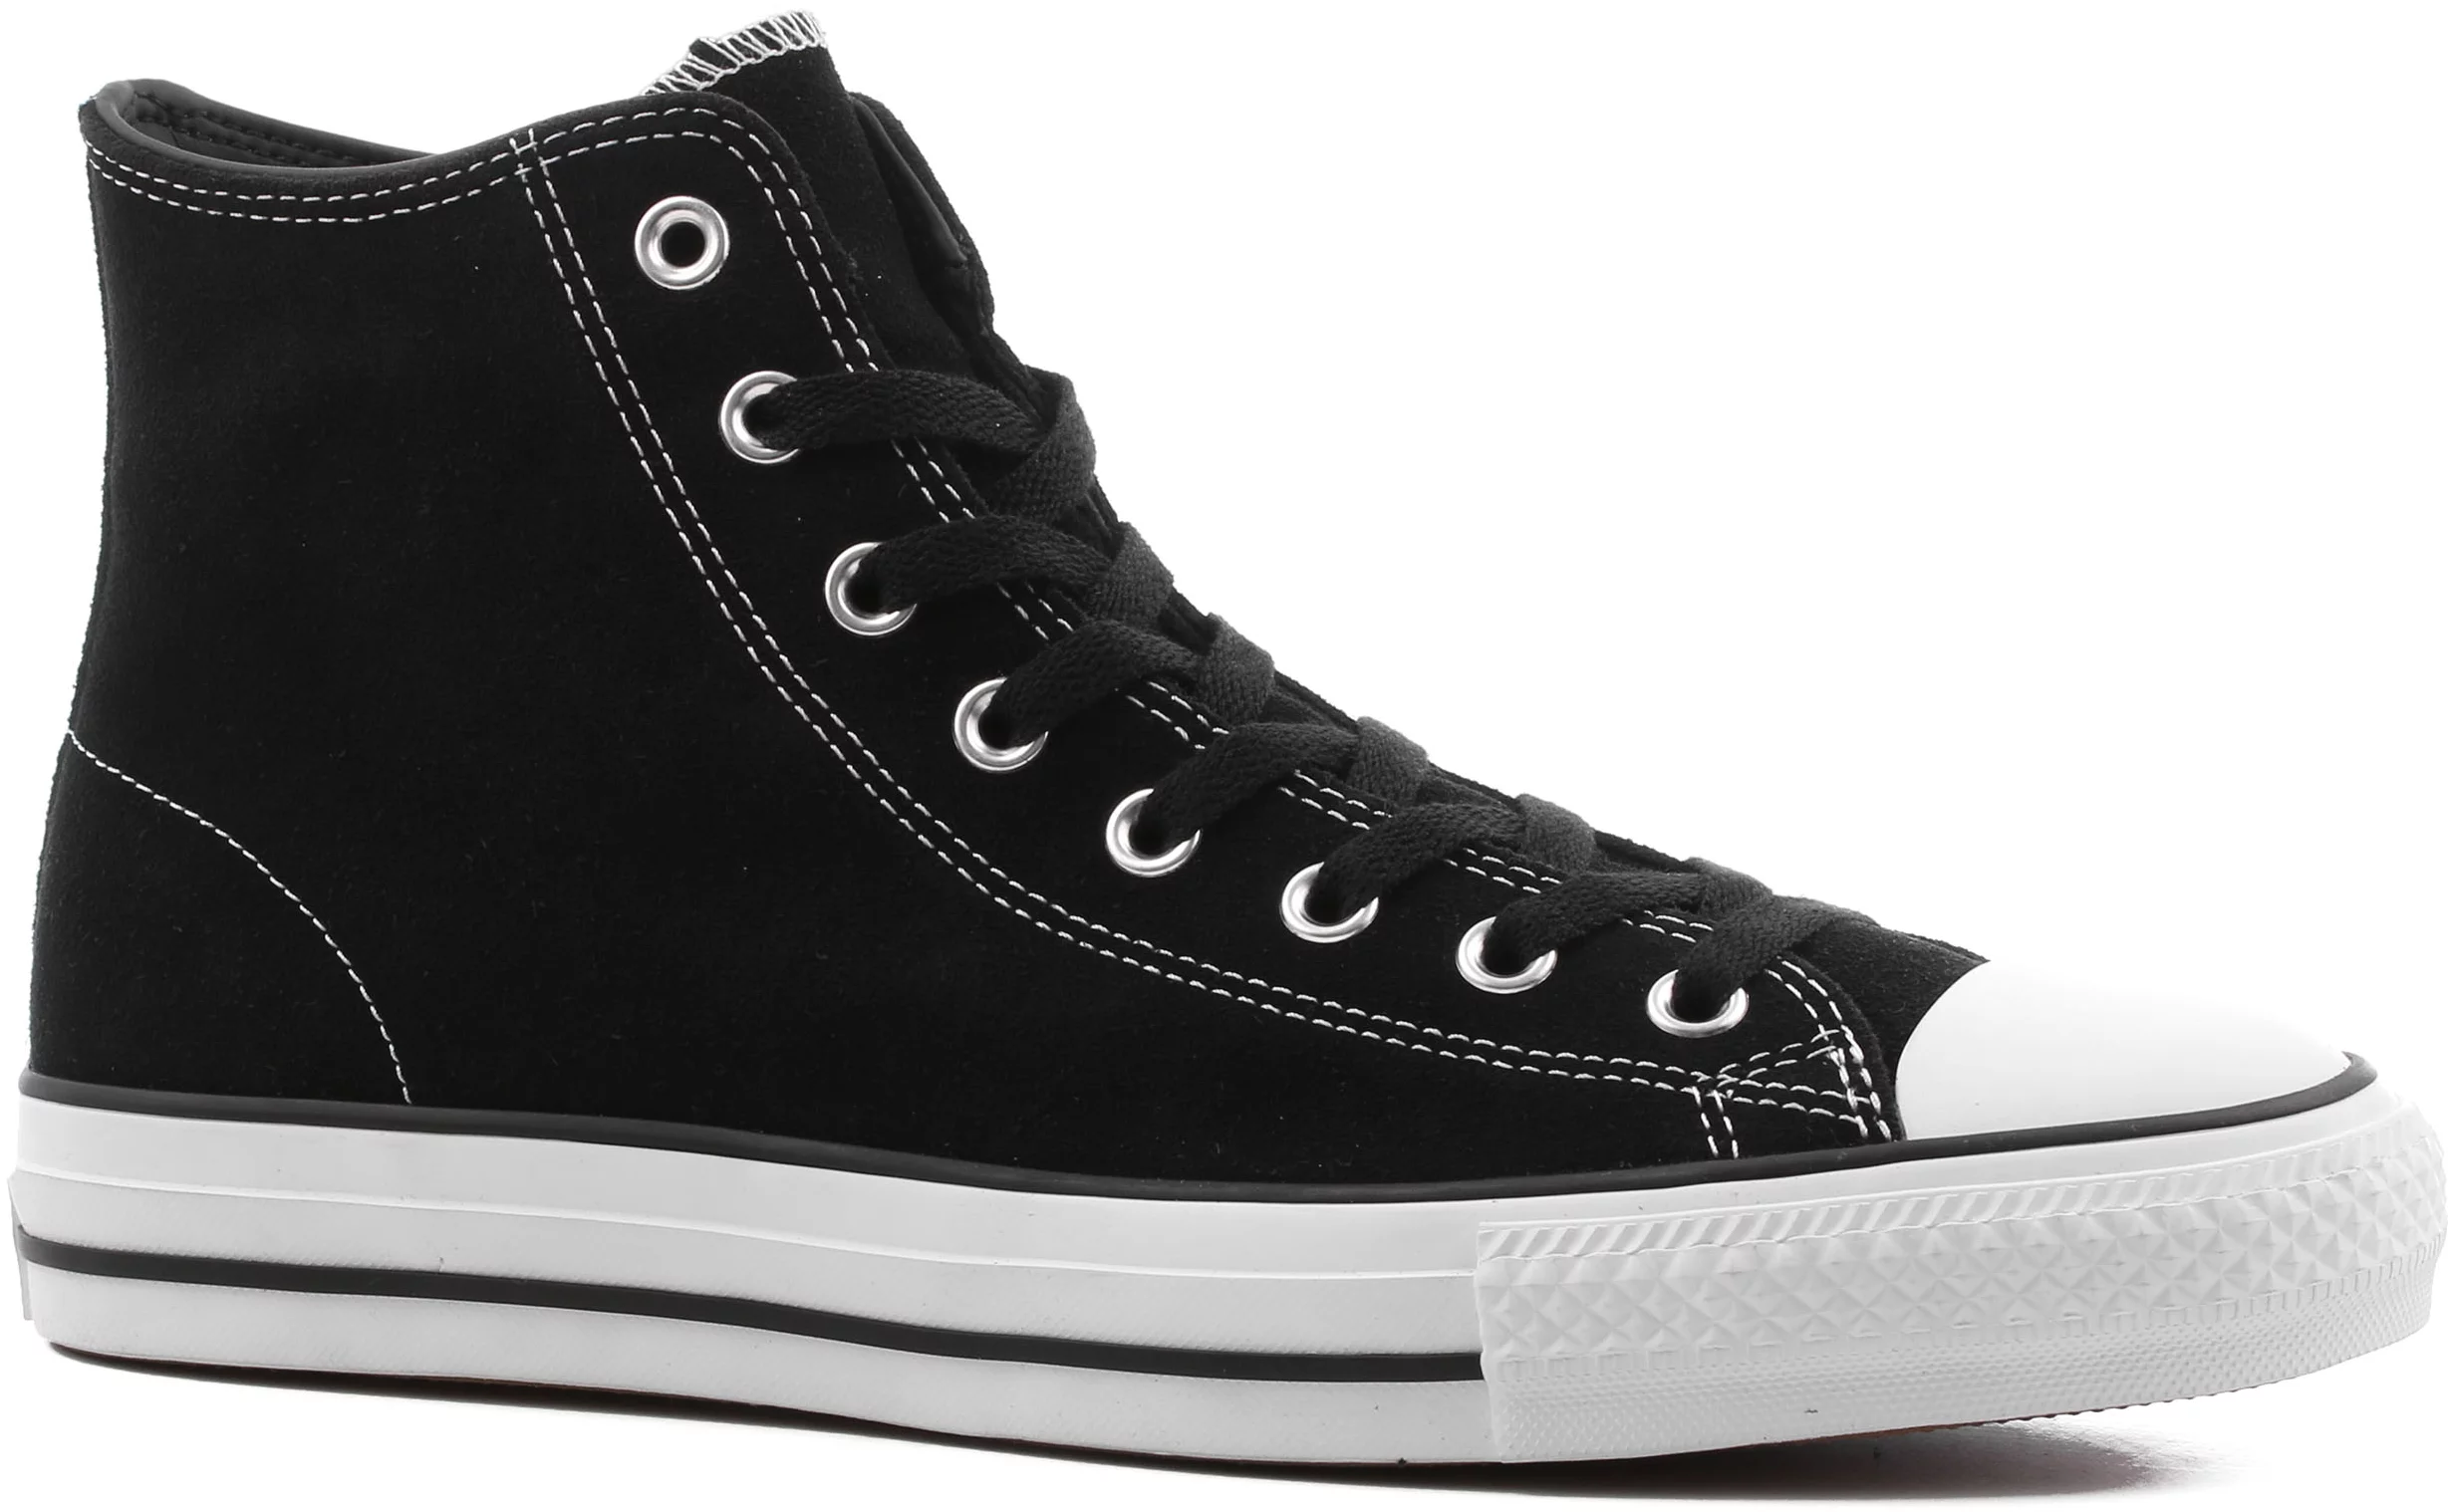 video schakelaar bestrating Converse Chuck Taylor All Star Pro High Skate Shoes - (suede)  black/black/white - Free Shipping | Tactics